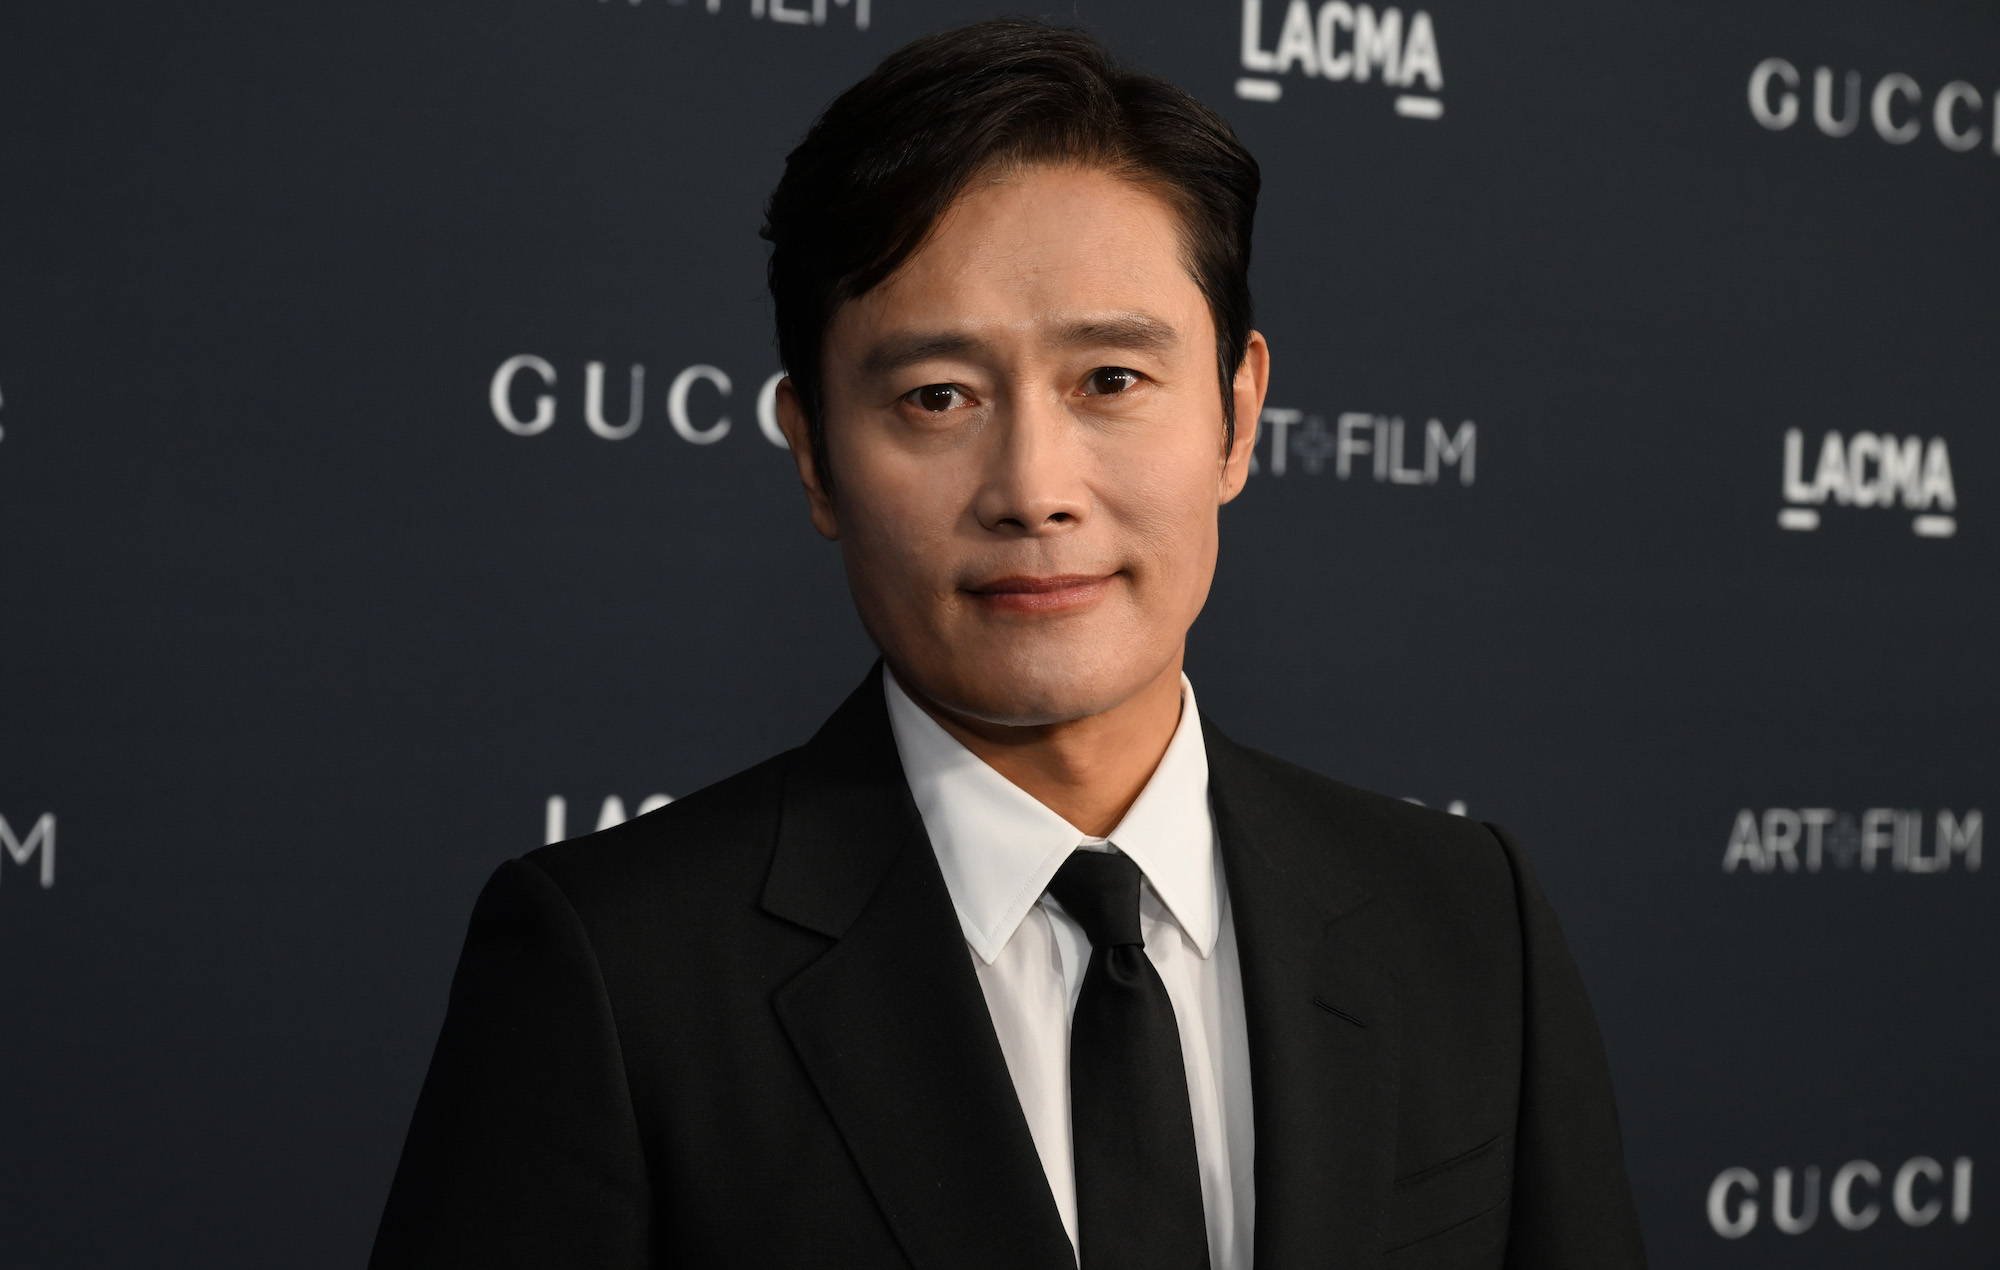 15 Mind-blowing Facts About Lee Byung-hun - Facts.net